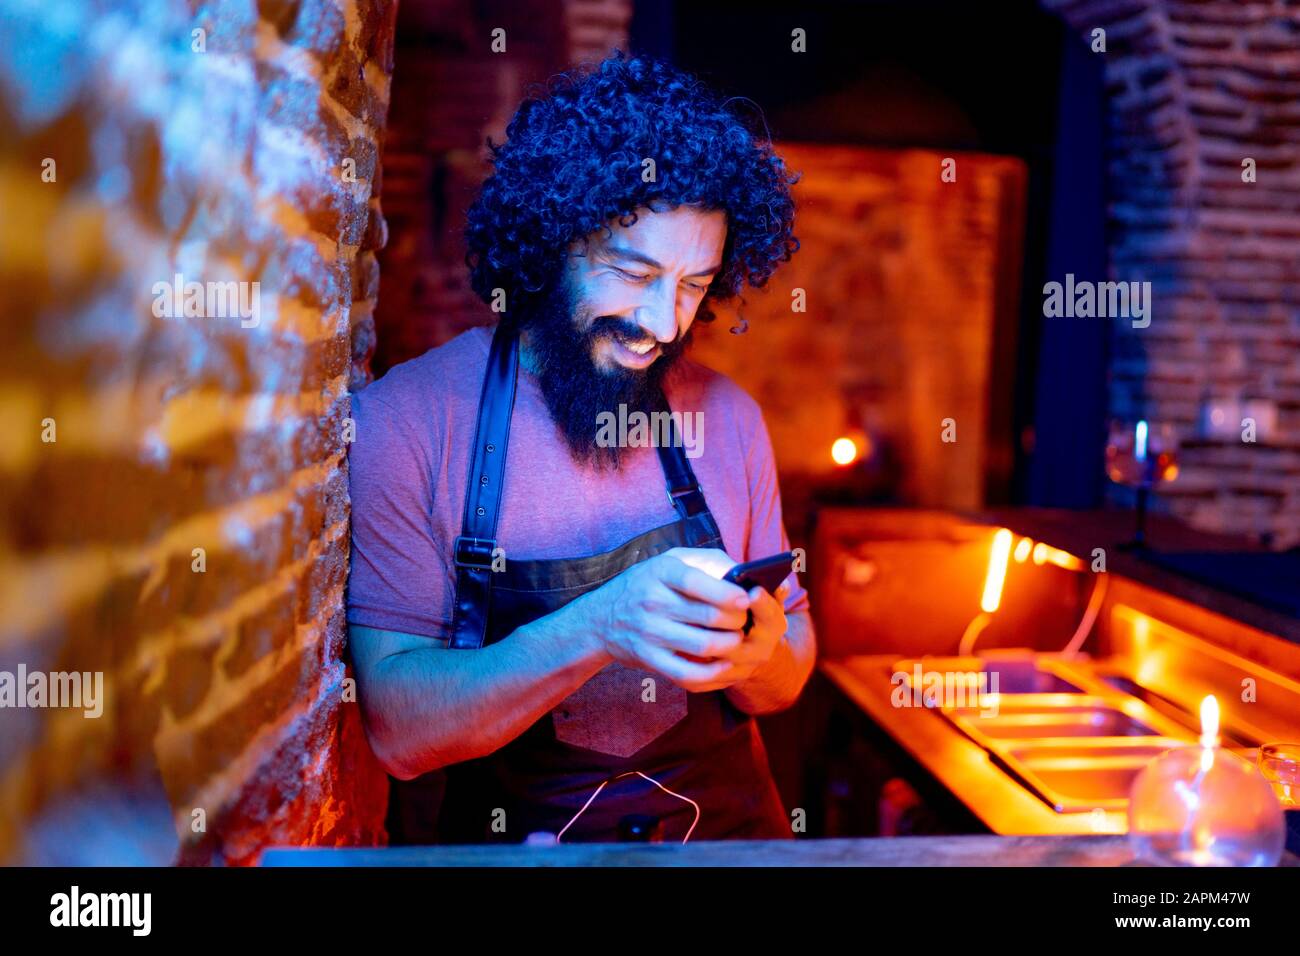 Young man, working in bar, using smartphone Stock Photo